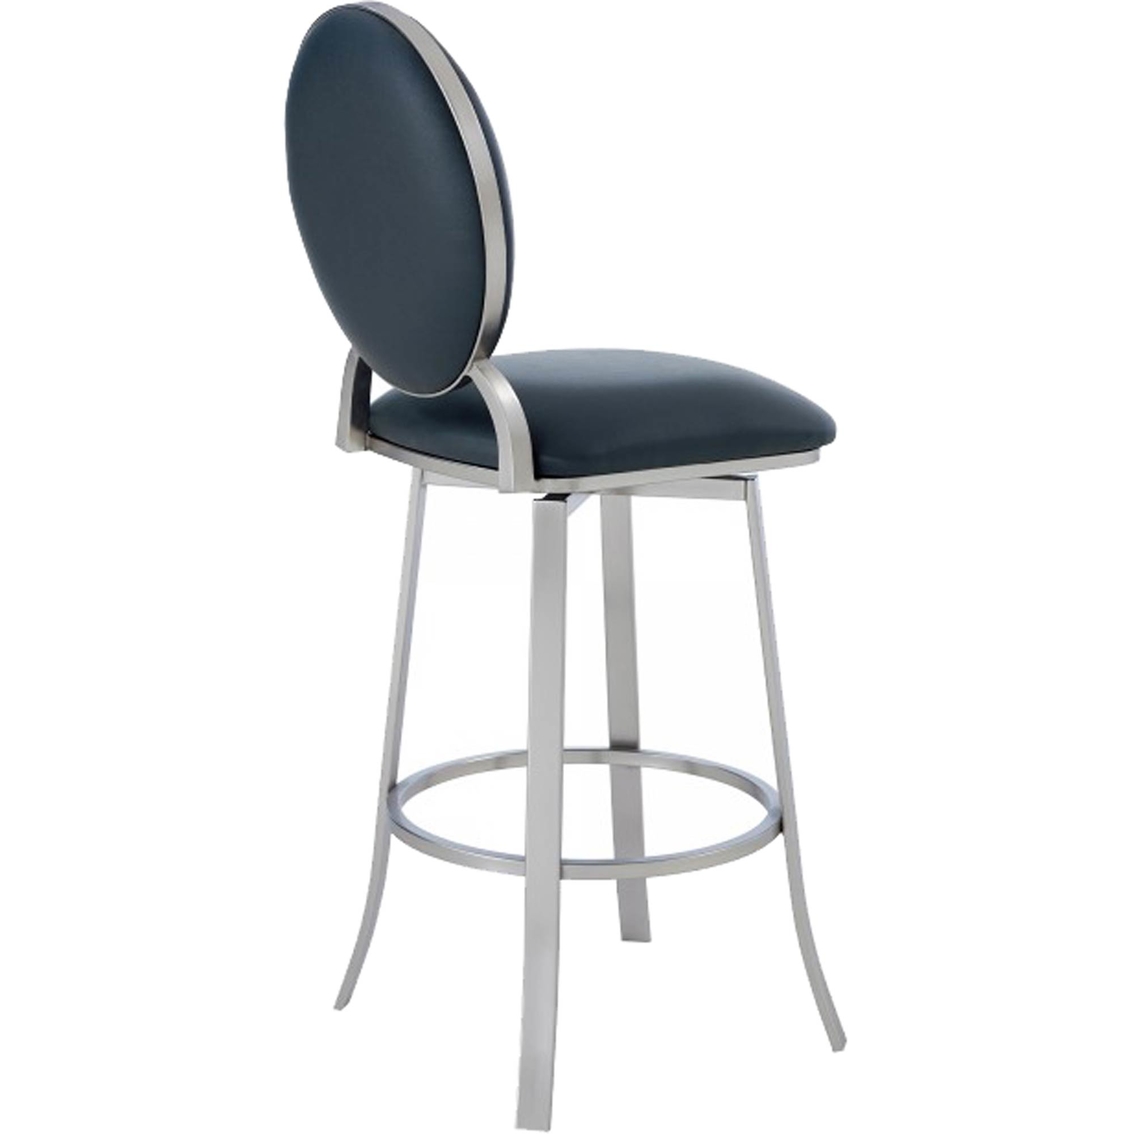 Armen Living Pia Barstool in Brushed Stainless Steel Finish and Black Faux Leather - Image 3 of 7